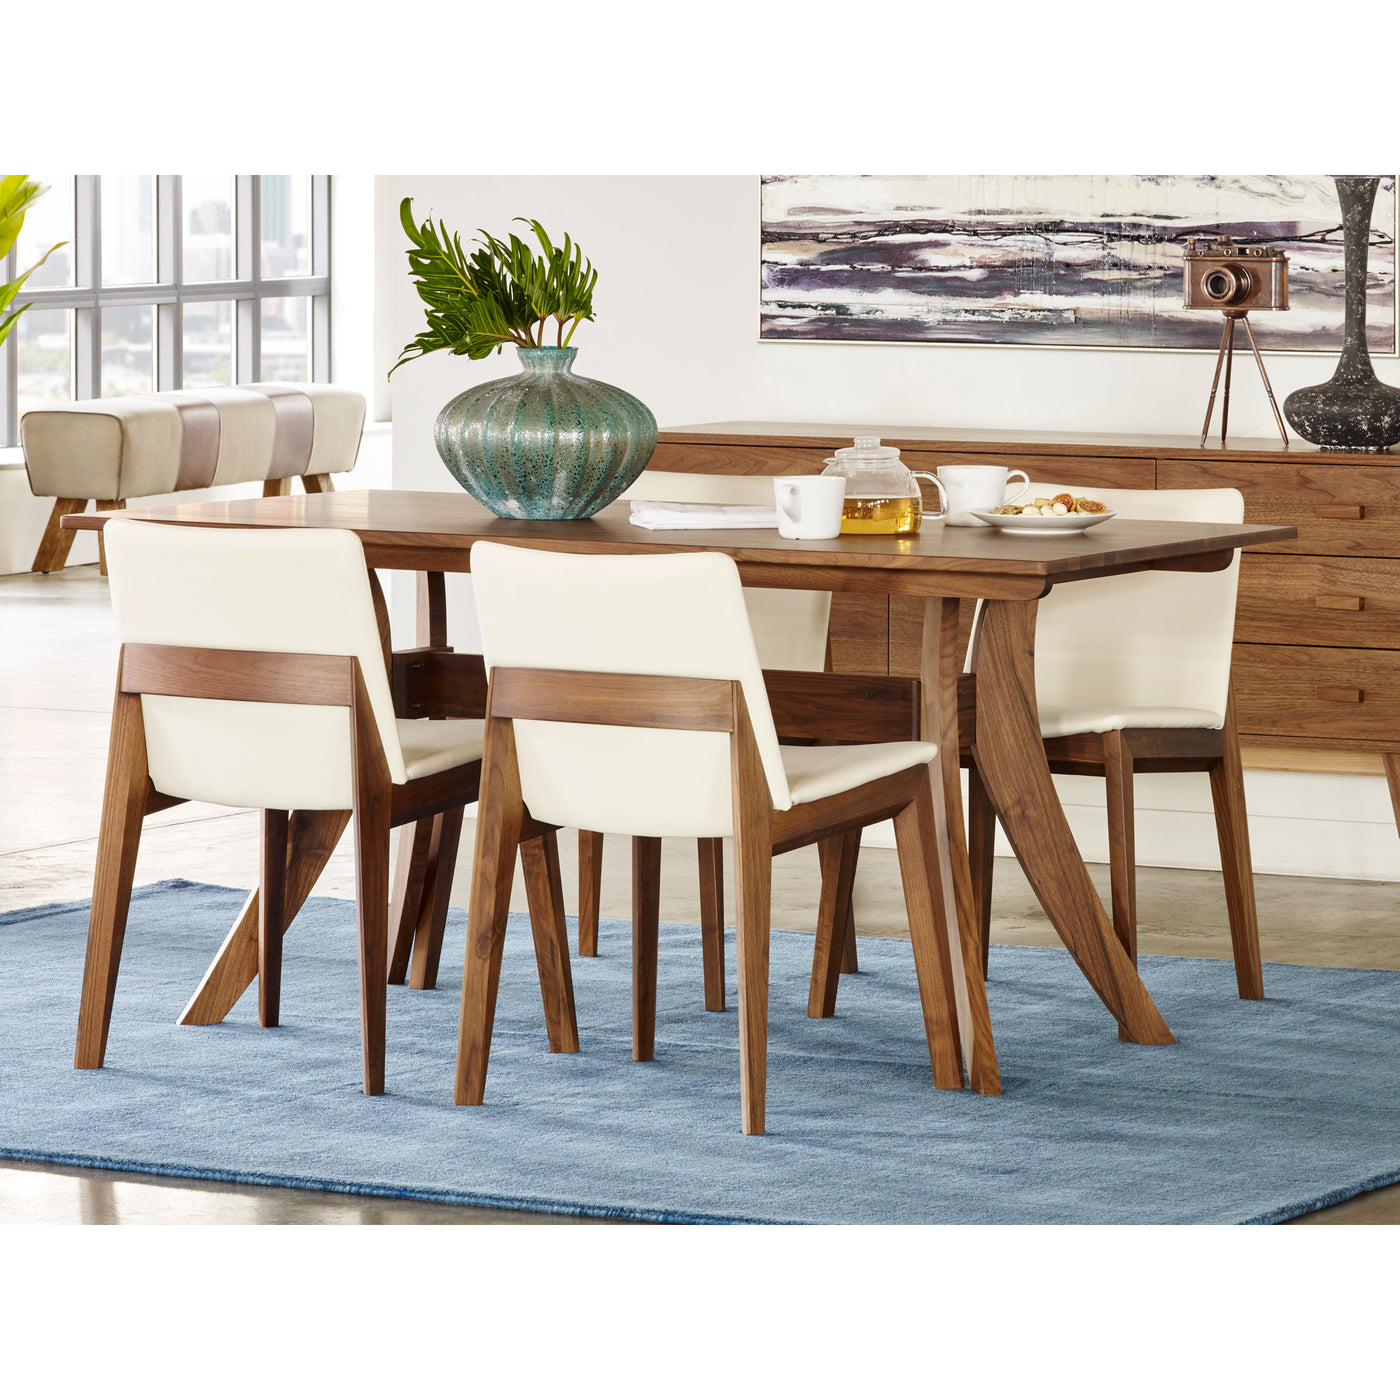 The Florence Dining Table's simple and elegant mid-century design creates a seamless transition into any dining space. Mad...